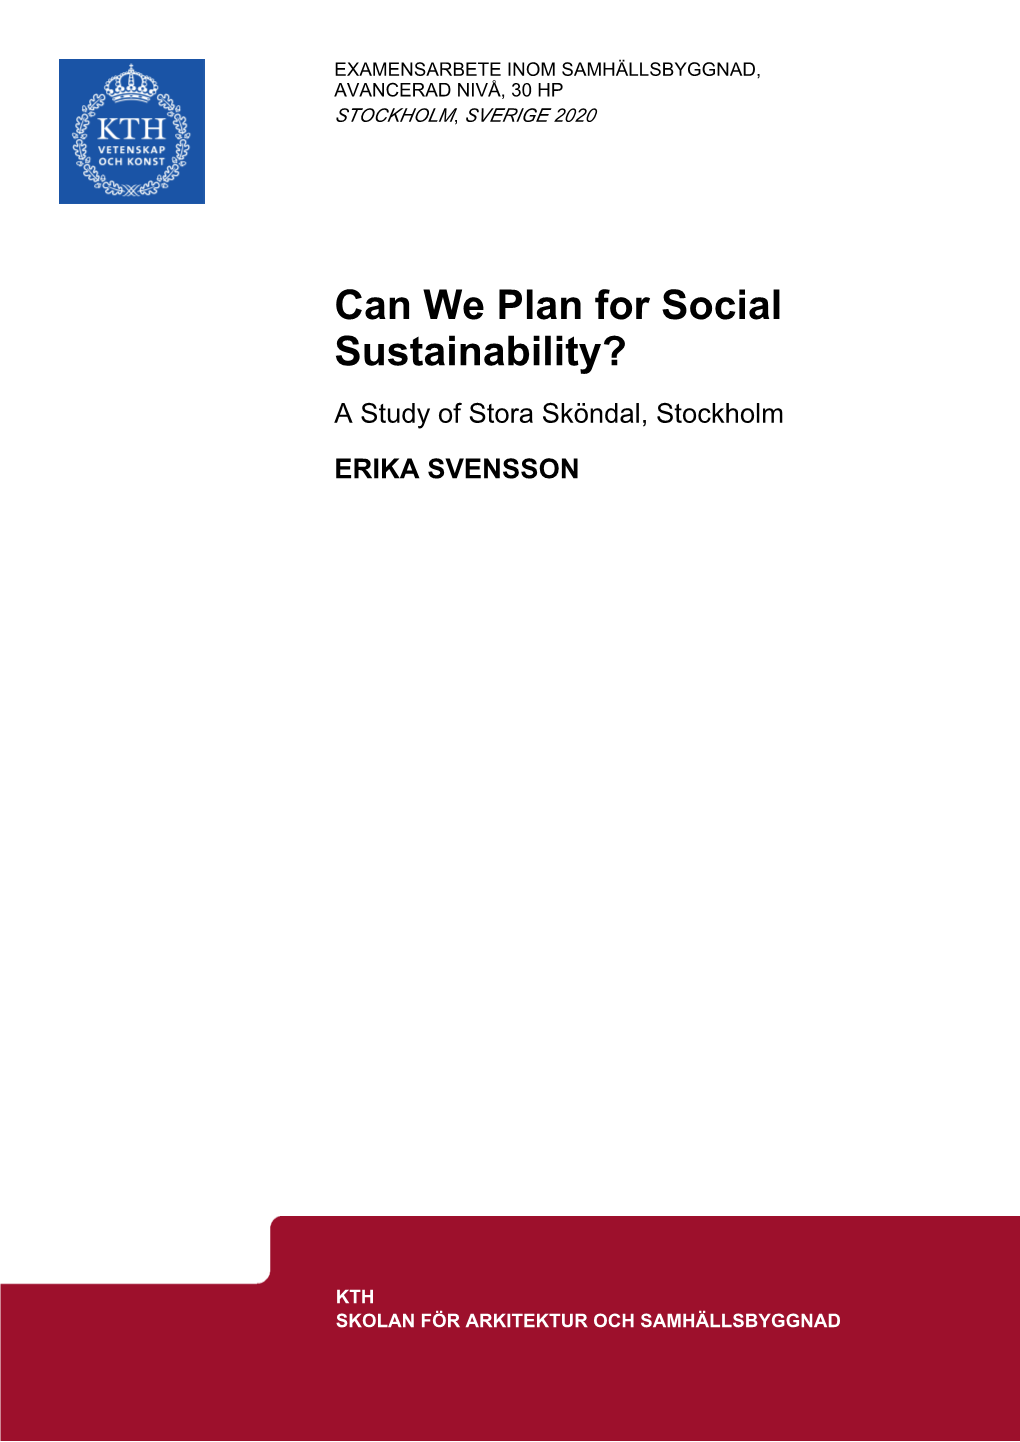 Can We Plan for Social Sustainability? a Study of Stora Sköndal, Stockholm